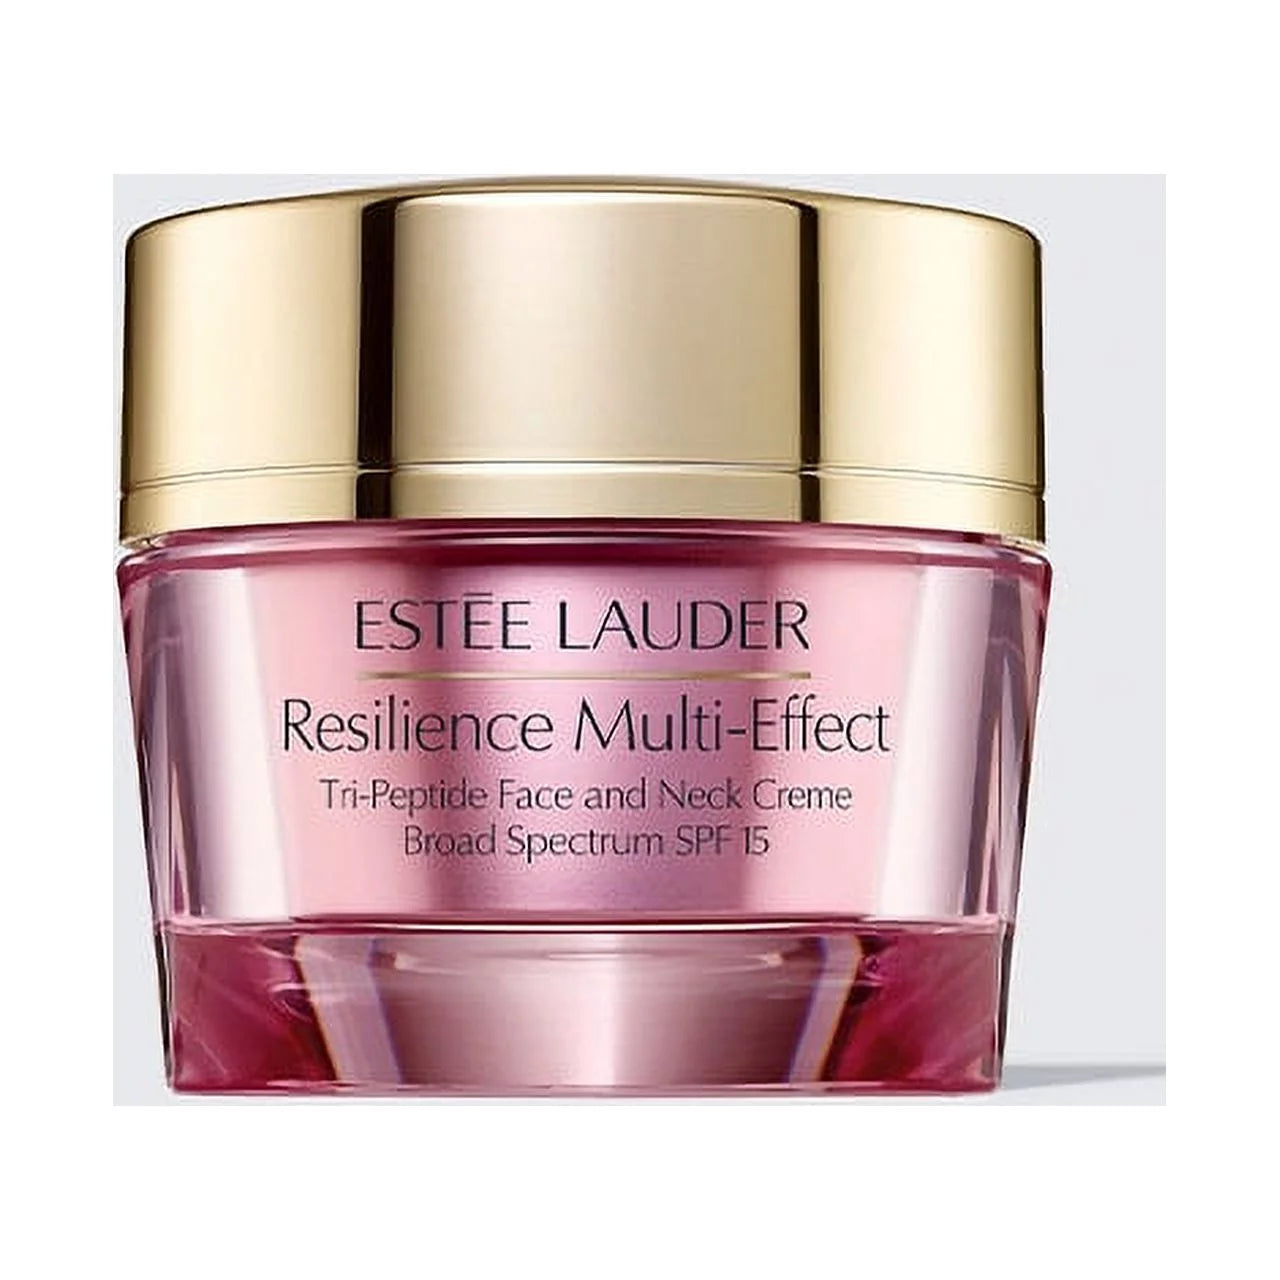 Resilience Multi-Effect Tri-Peptide Face and Neck Creme SPF 15 for Normal/Combination Skin 1Oz /30 Ml UNBOX